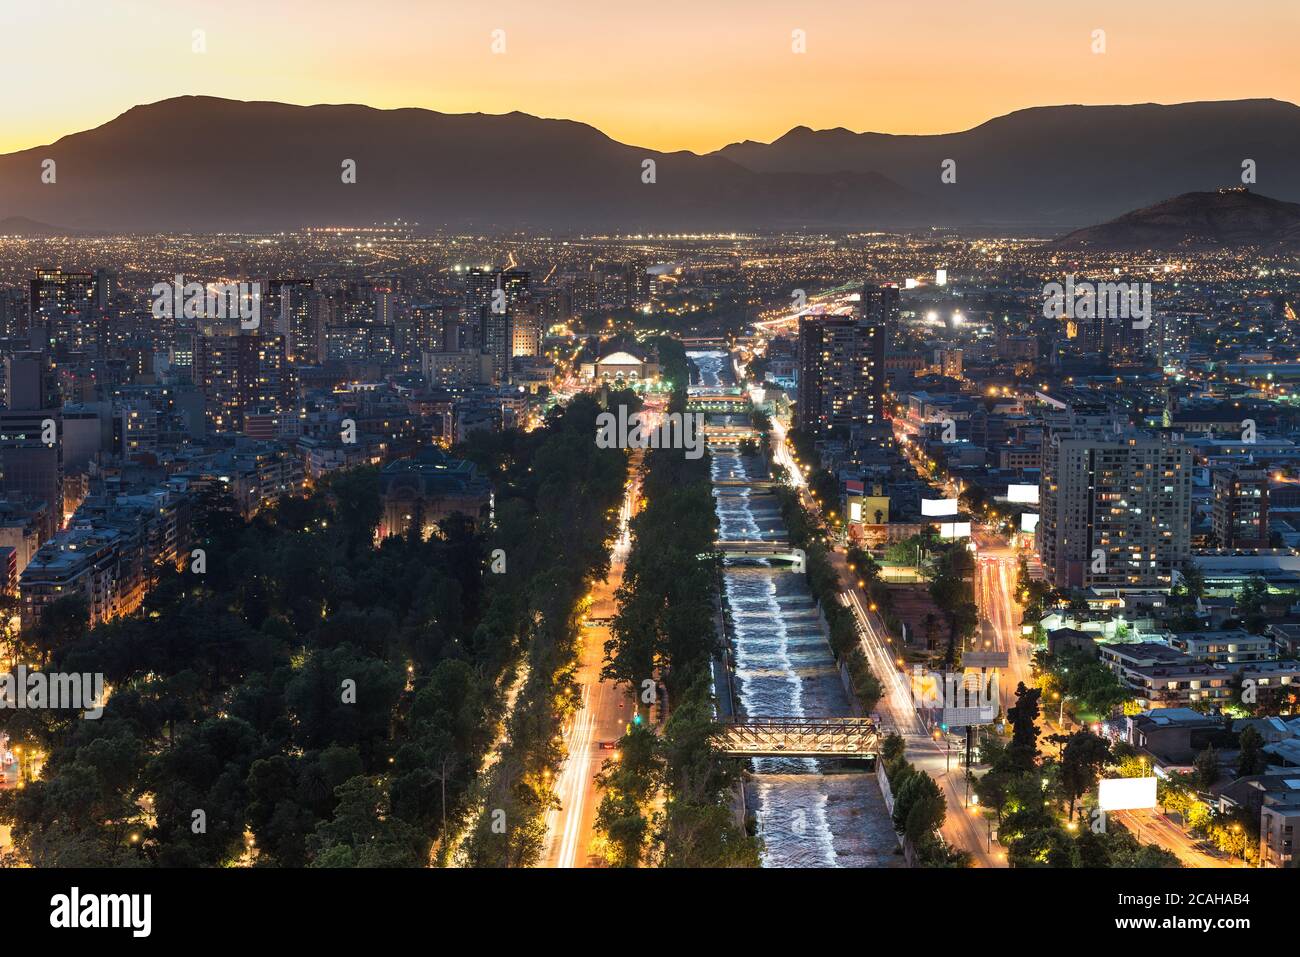 Mapocho River and Forestal Park at downtown with the neighborhoods of Patronato, Bellas Artes and Bellavista, Santiago, Chile Stock Photo